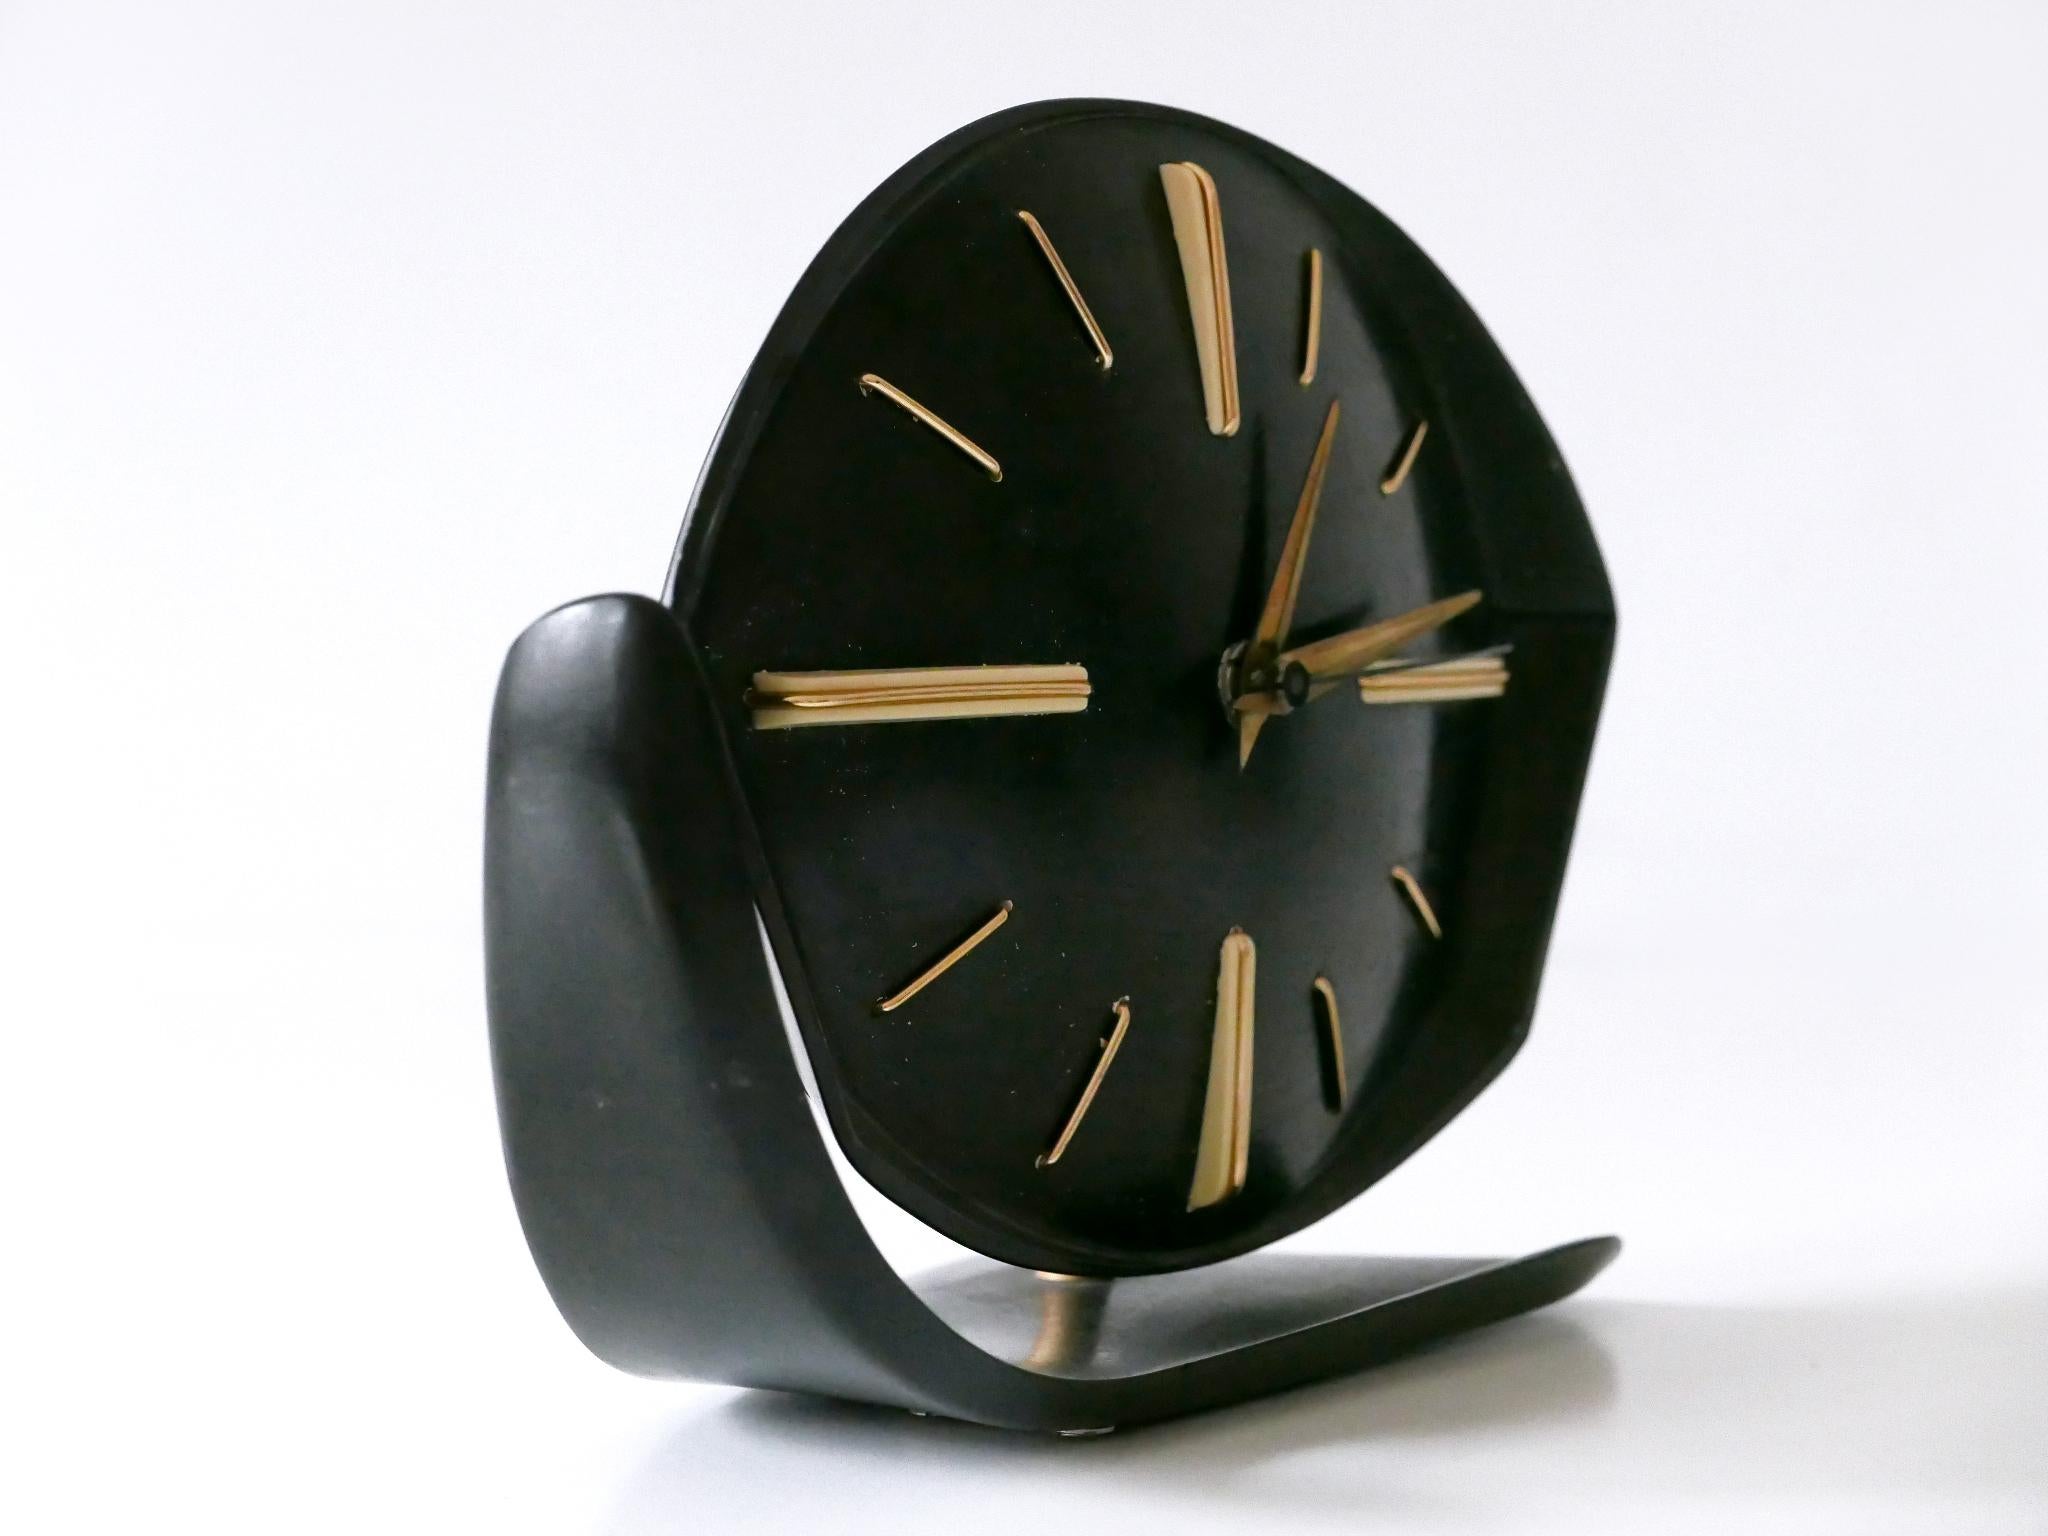 Rare and highly decorative Mid-Century Modern table or wall clock. Rotating body due to brass joint ball. Designed and manufactured by PRIM clocks, Czech Republic, 1950s.

Executed in black bakelite and and brass.

Measurements:
Height: 7.49 in (19